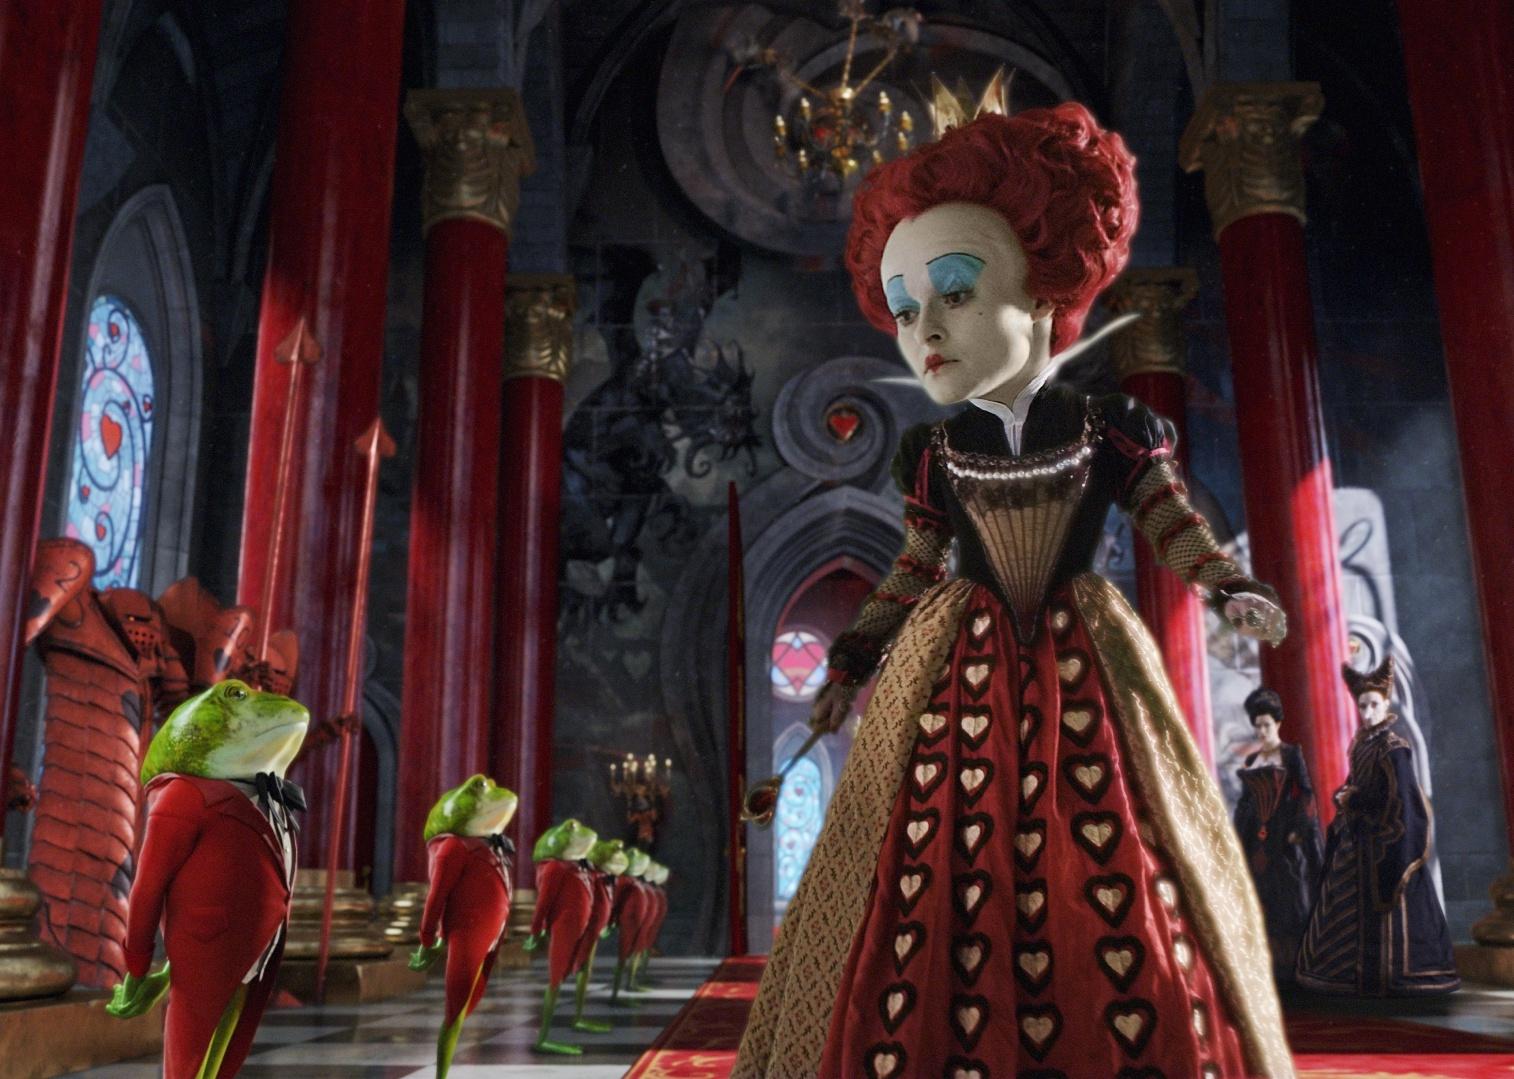 Helena Bonham Carter as the Queen of Hearts in a Palace hall lined with frogs in butler uniforms.